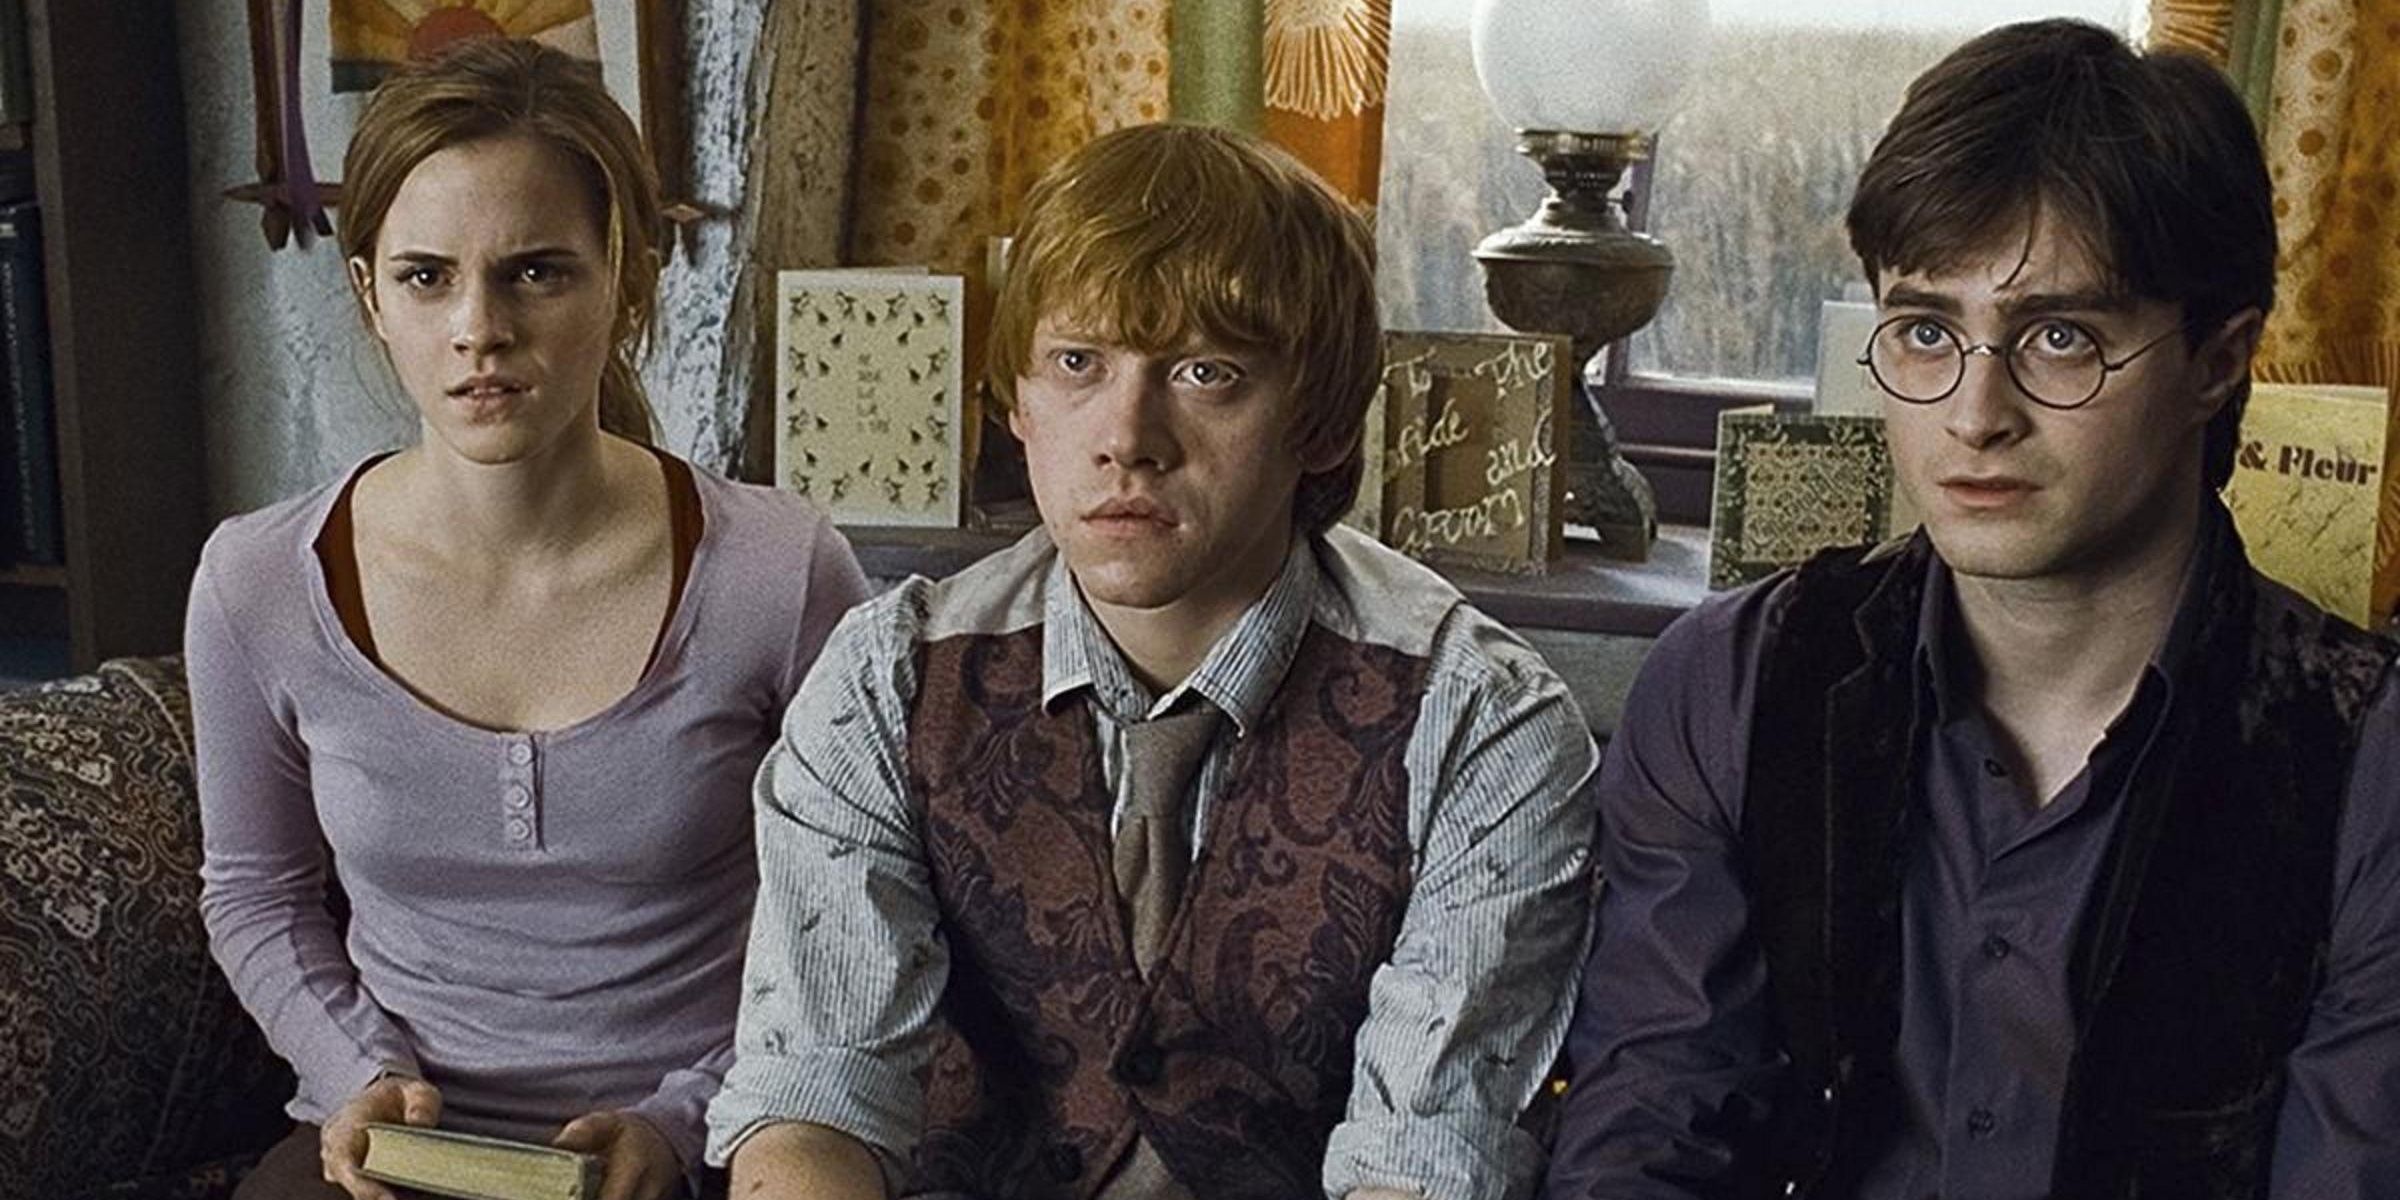 Ron, Hermione, and Harry sit on a couch in Deathly Hallows Part 1 